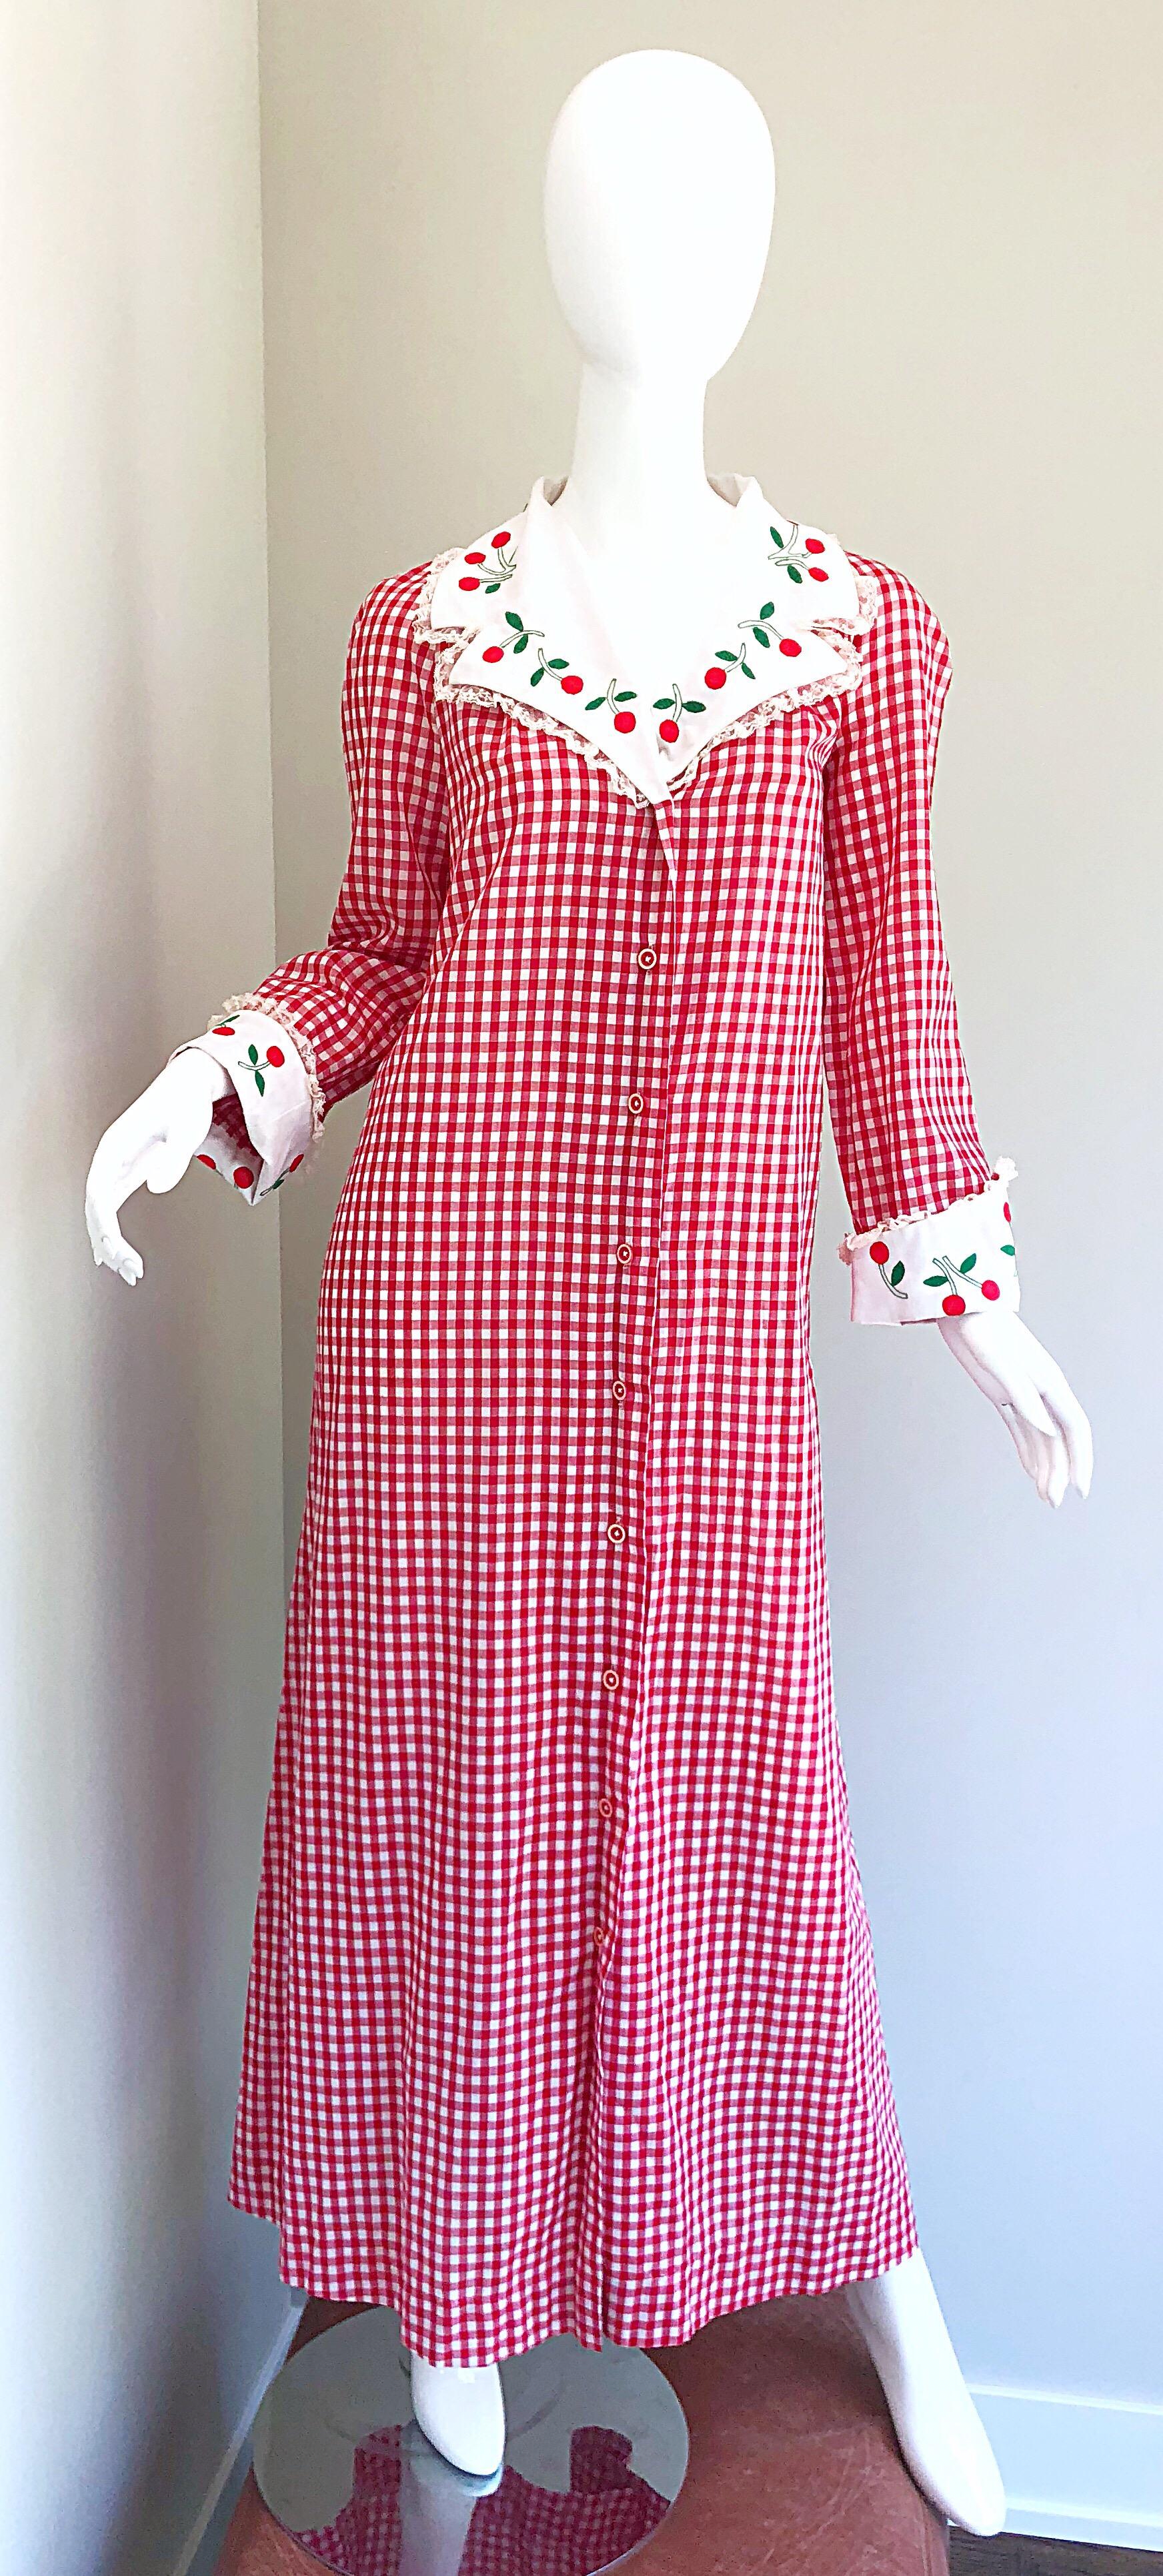 Amazing 70s SAKS FIFTH AVE. red and white checkered / gingham cherry embroidered lightweight cotton maxi dress! Features allover red and white gingham print, with cherries embroidered around the collar and sleeve cuffs. Buttons up the front. POCKETS